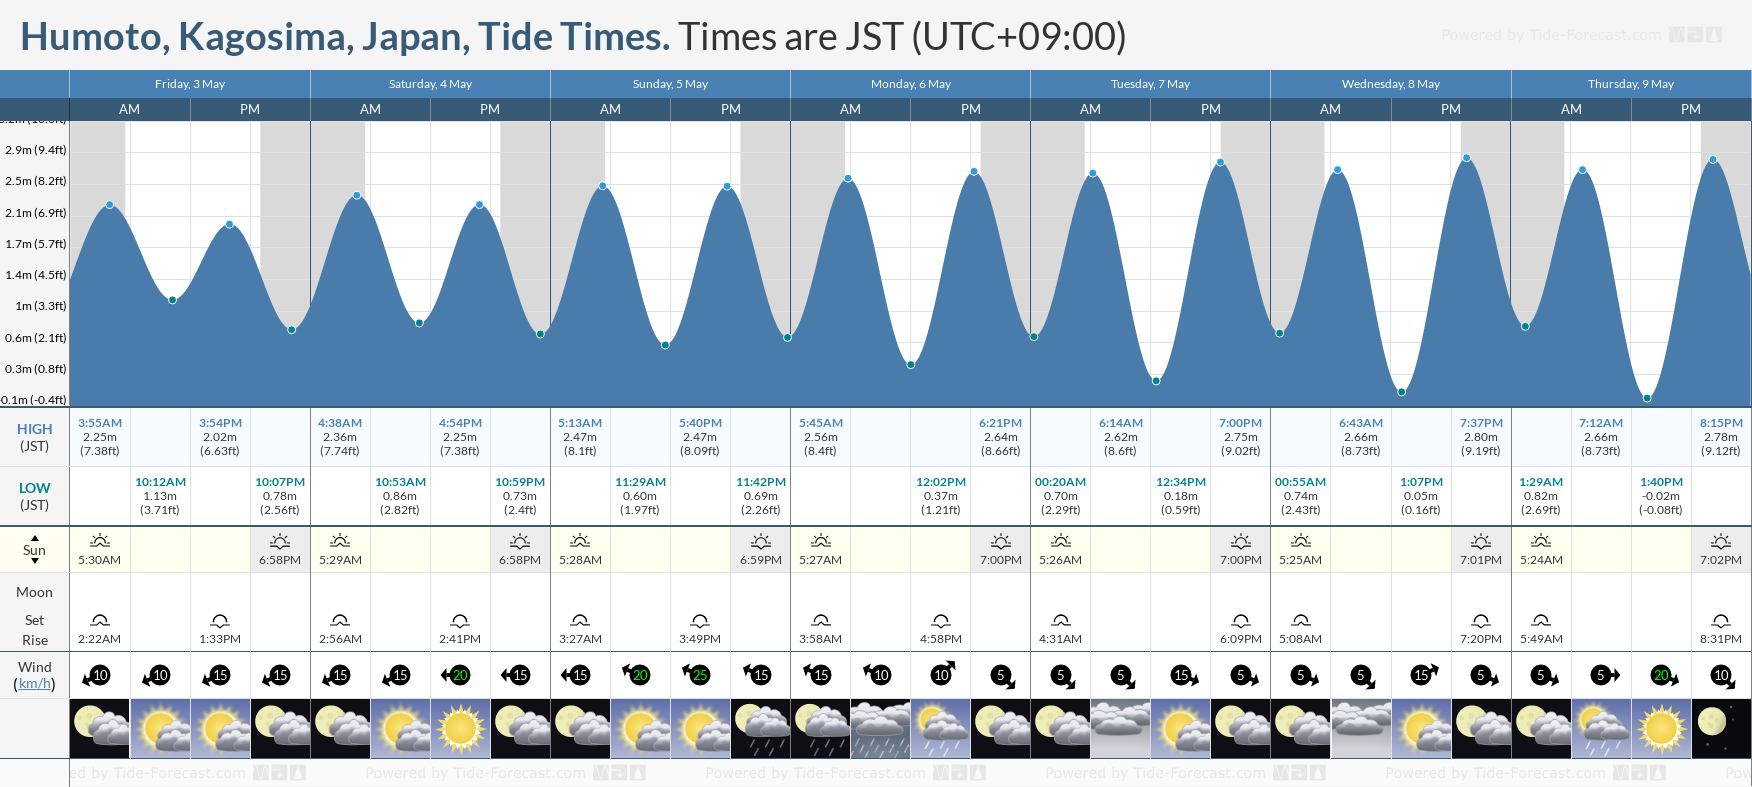 Humoto, Kagosima, Japan Tide Chart including high and low tide times for the next 7 days